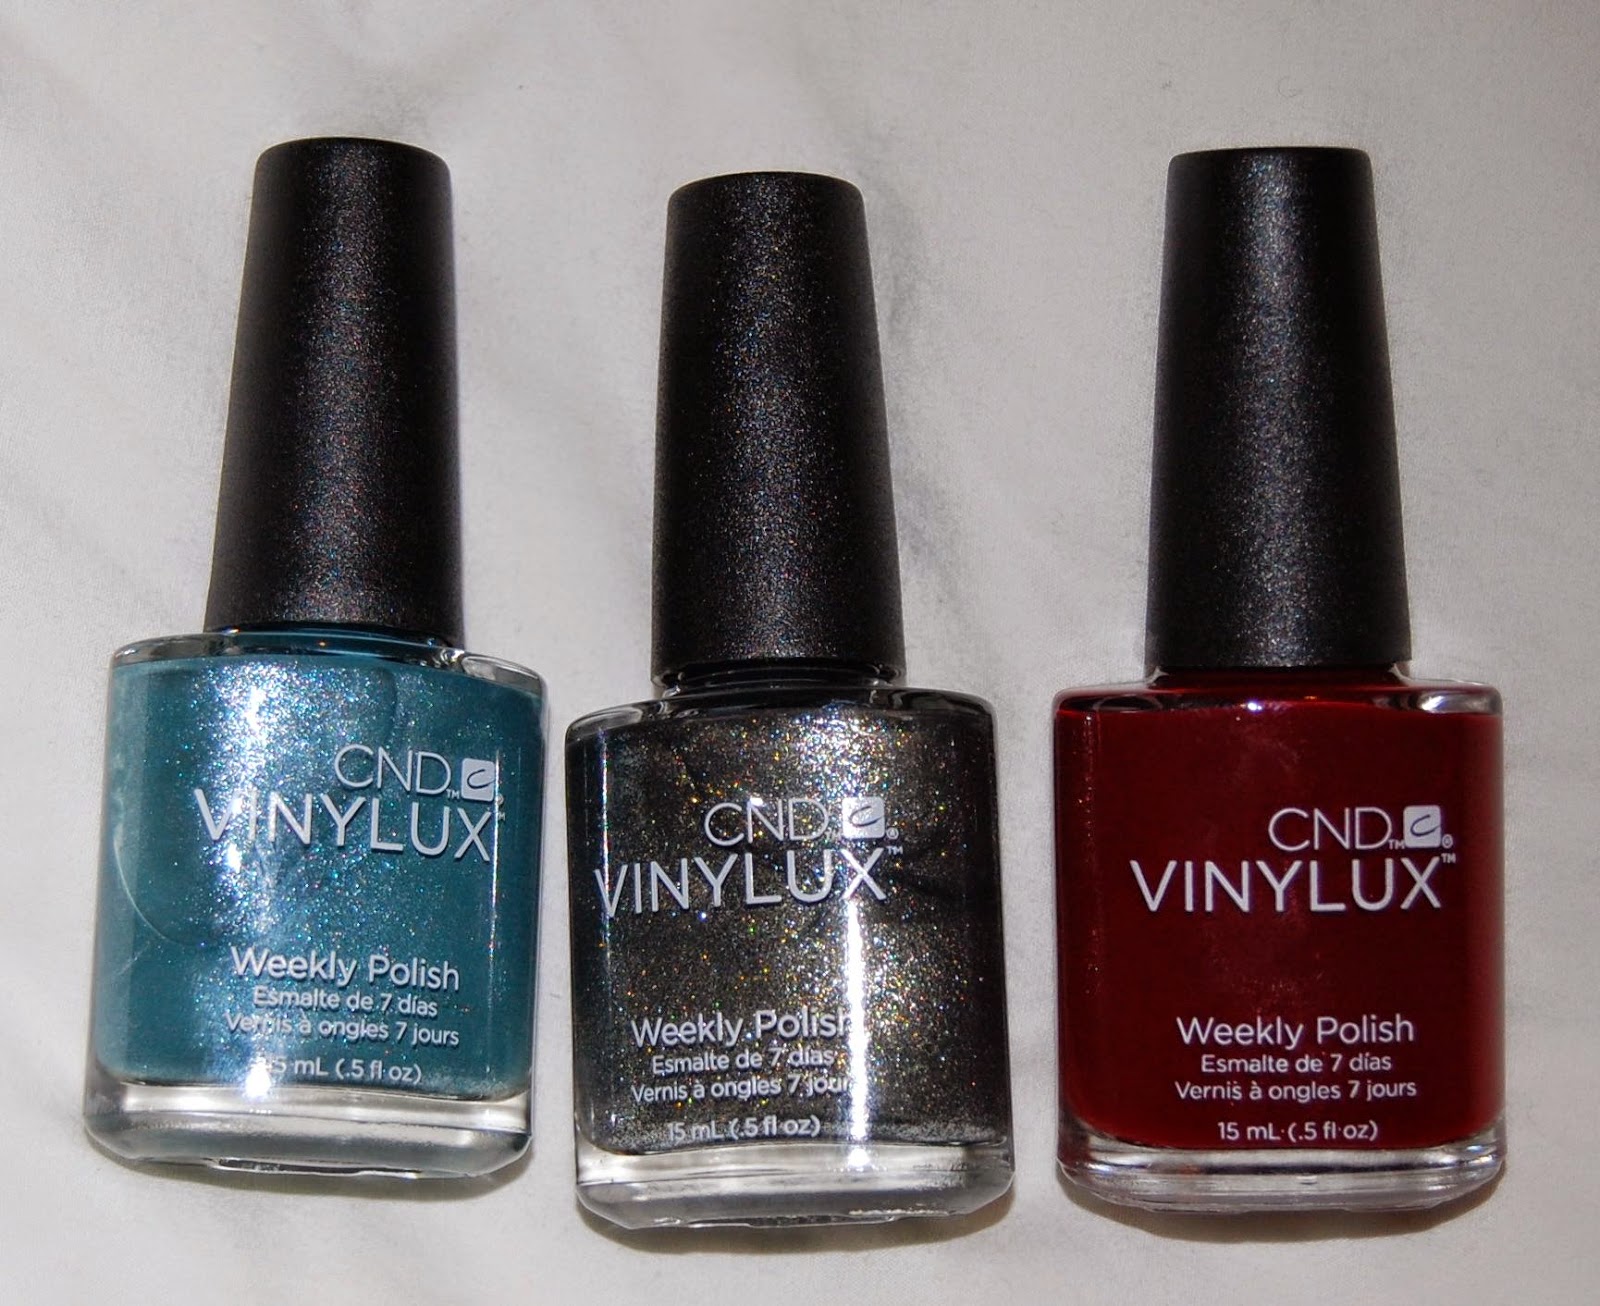 CND Vinylux Weekly Polish in "Palm Springs Escape" - wide 5